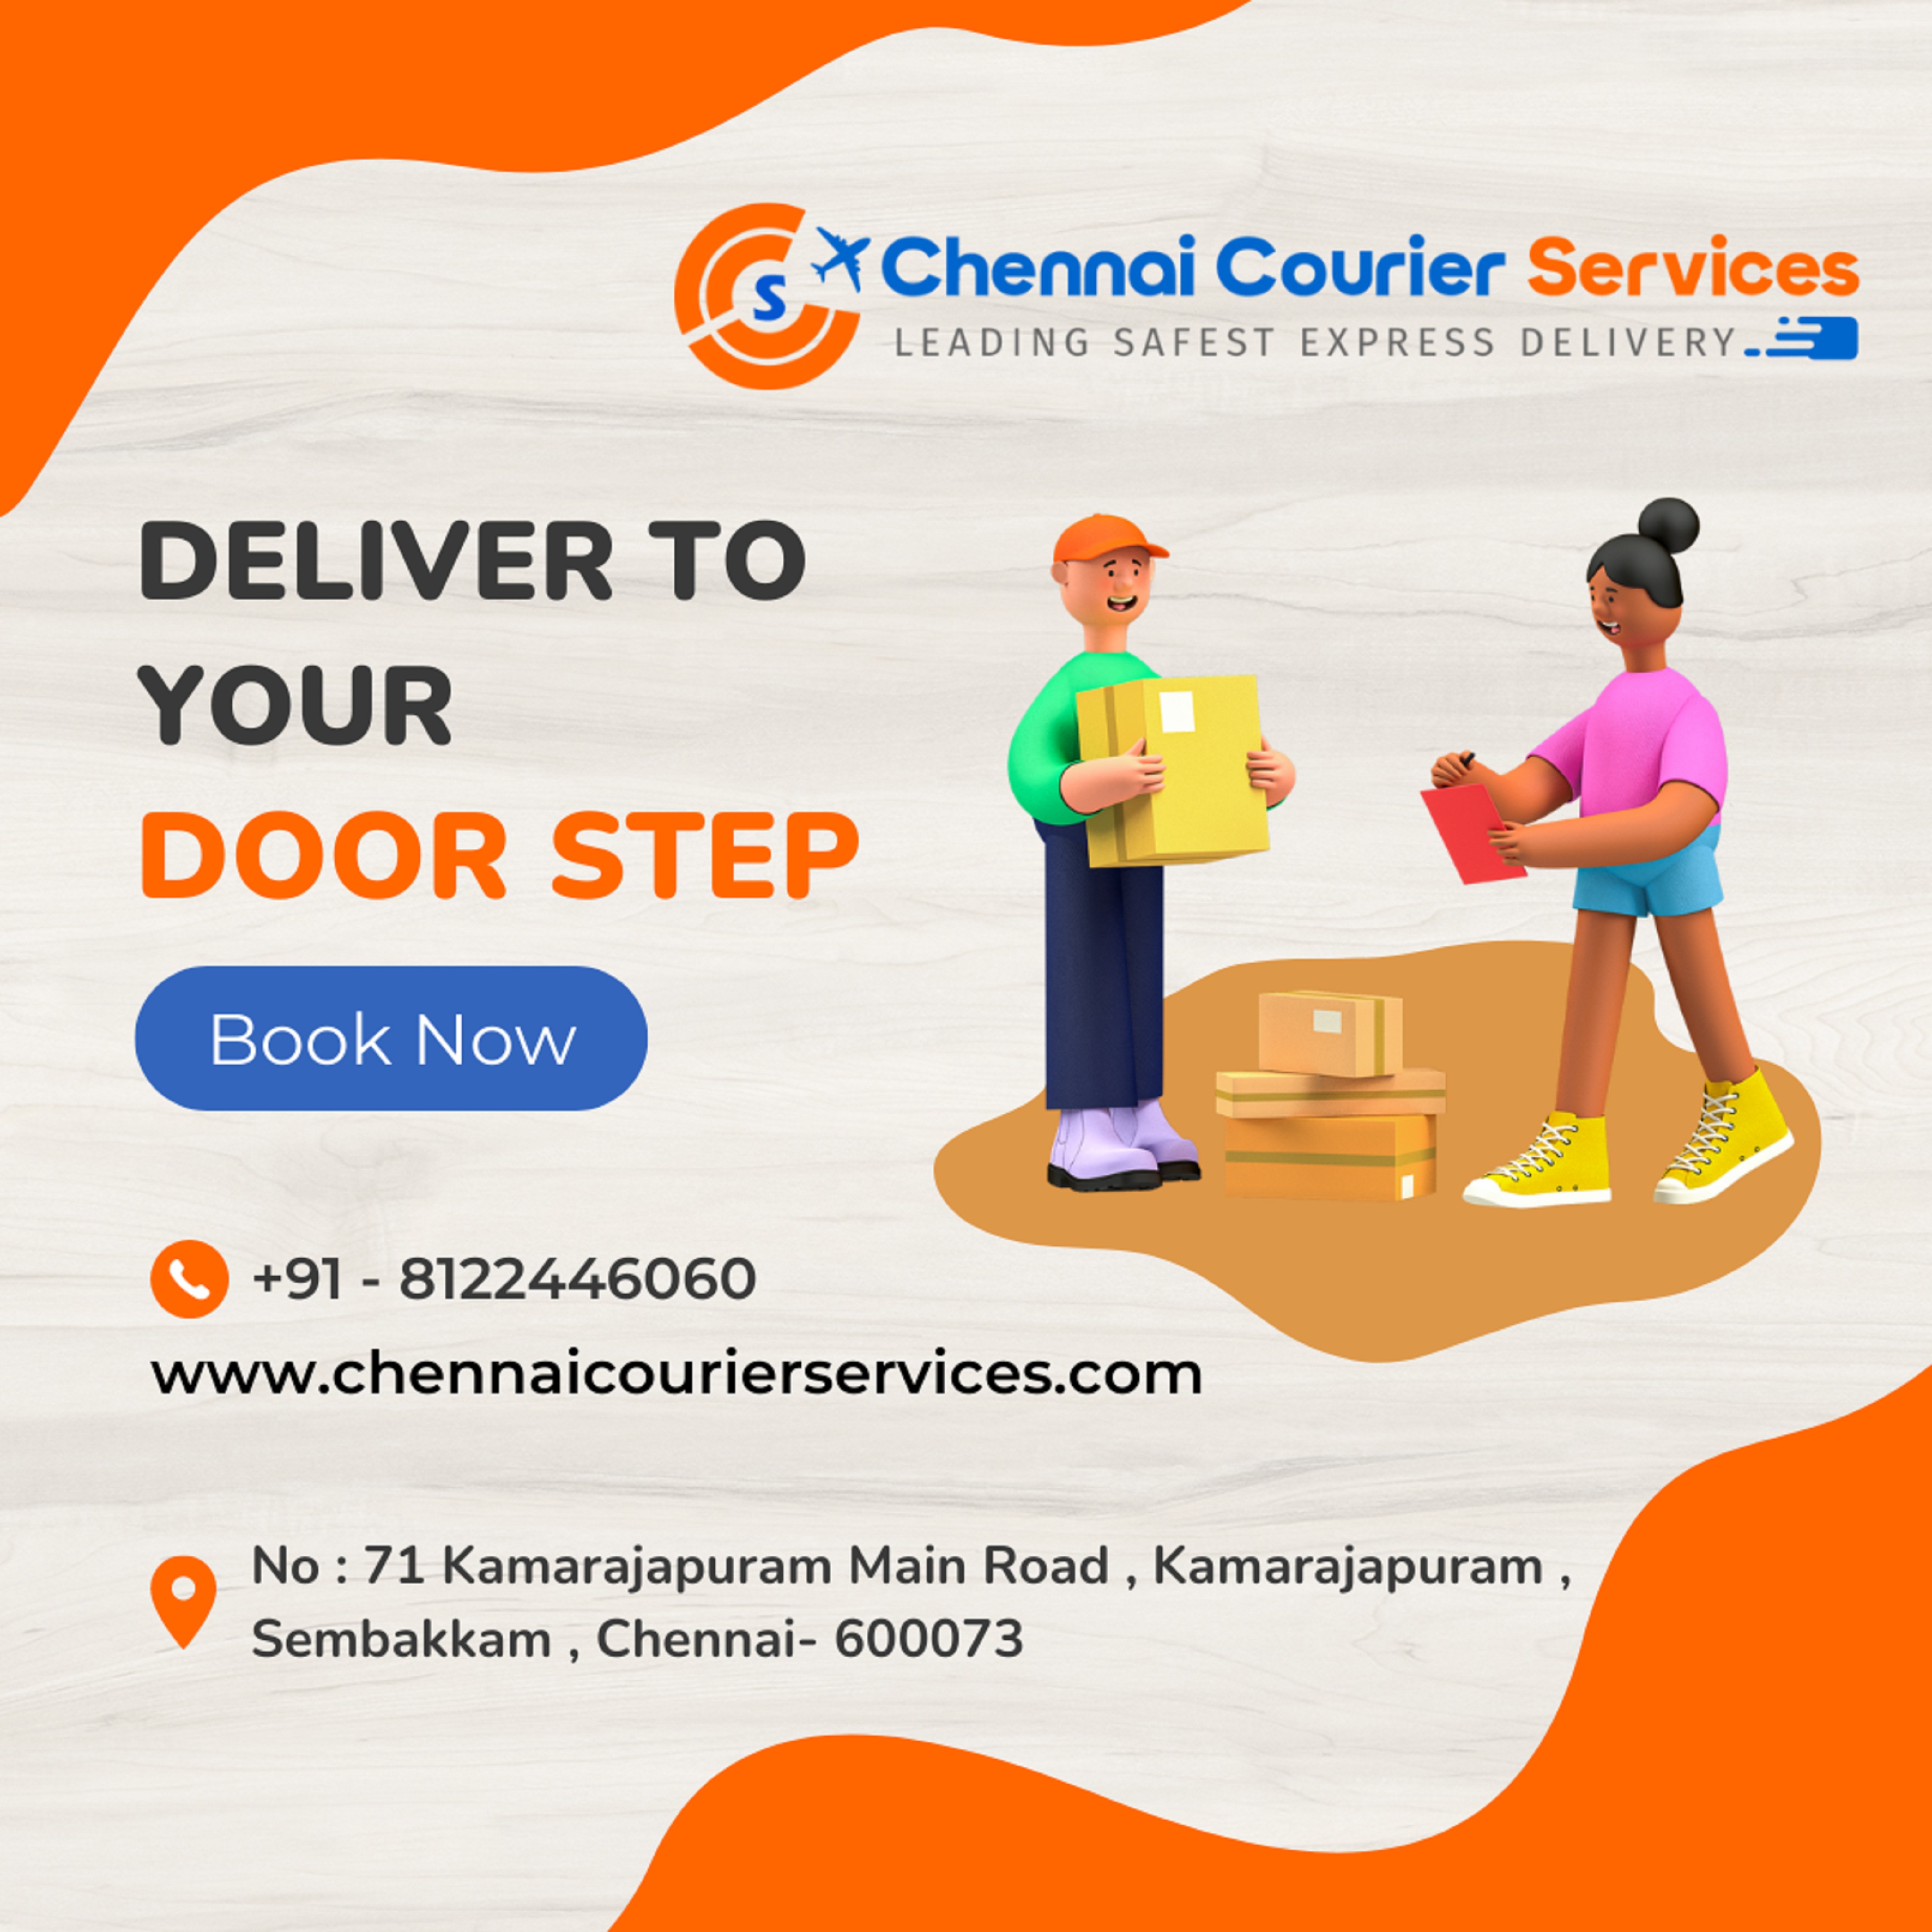 Chennai Courier Service Leading Delivery Service in Chennai